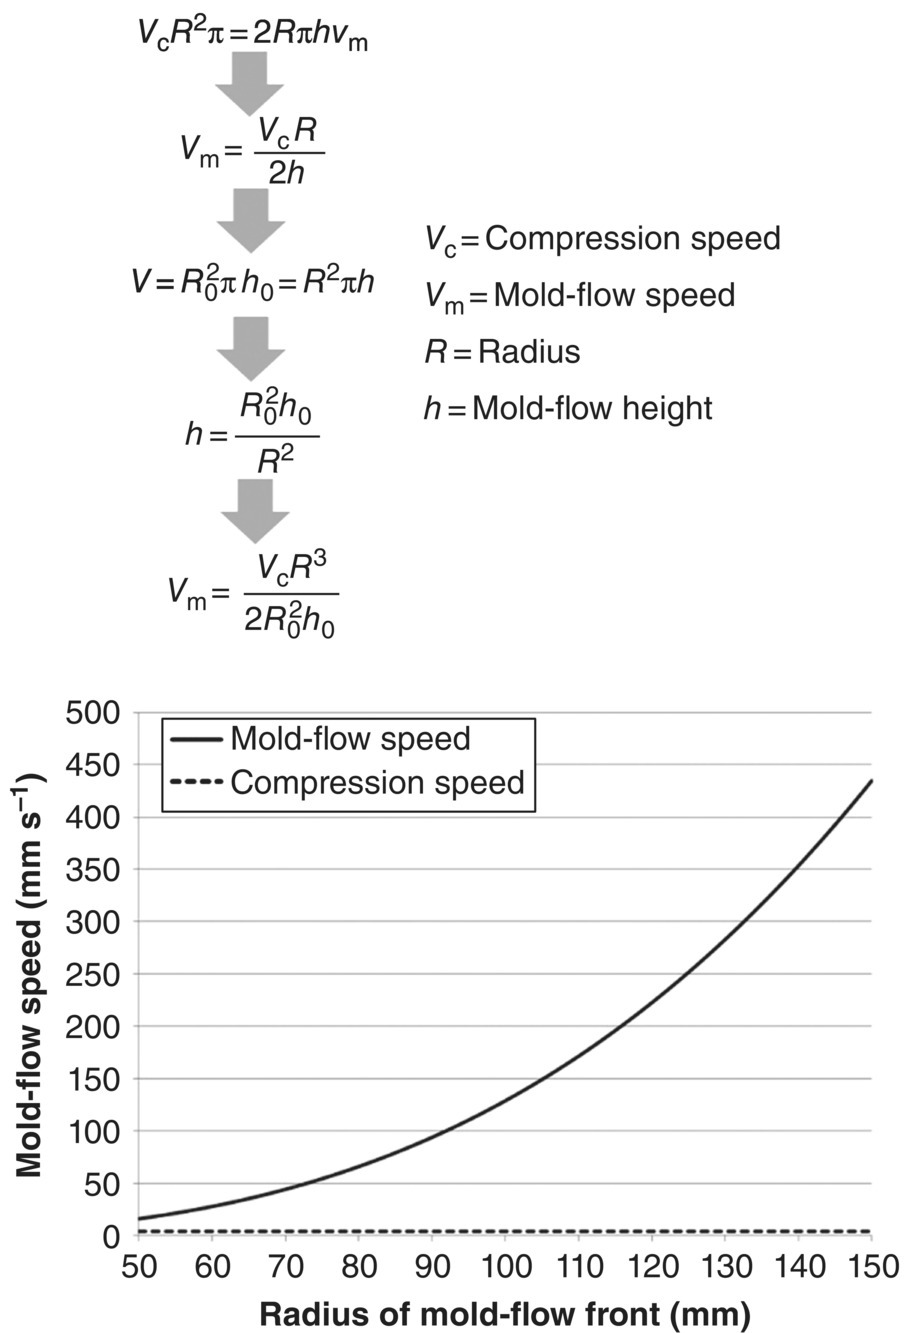 Top: Schematic flow starting from VcR2π=2Rπhvm leading to Vm=VcR3/2R20h0. Bottom: Mold flow speed vs. compression speed displaying a dashed line for compression speed and solid ascending curve for mold-flow speed.